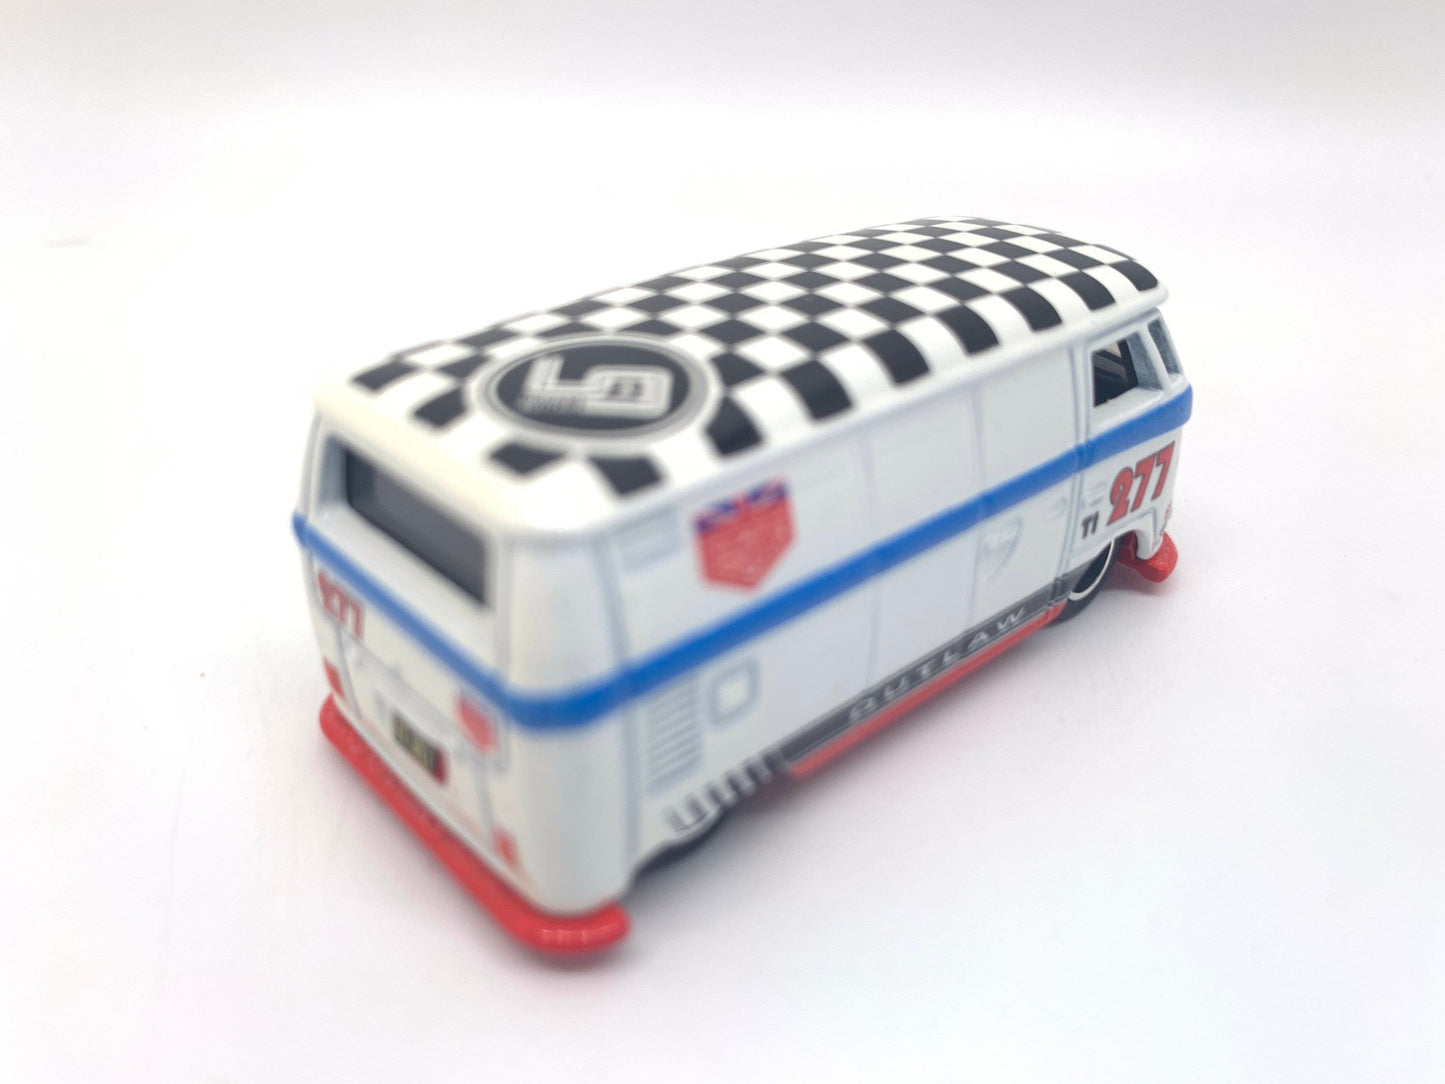 Hot Wheels Volkswagen T1 Panel Bus White Checkerboard Boulevard Collectable Diecast 1/64 Scale Miniature Model Toy Car